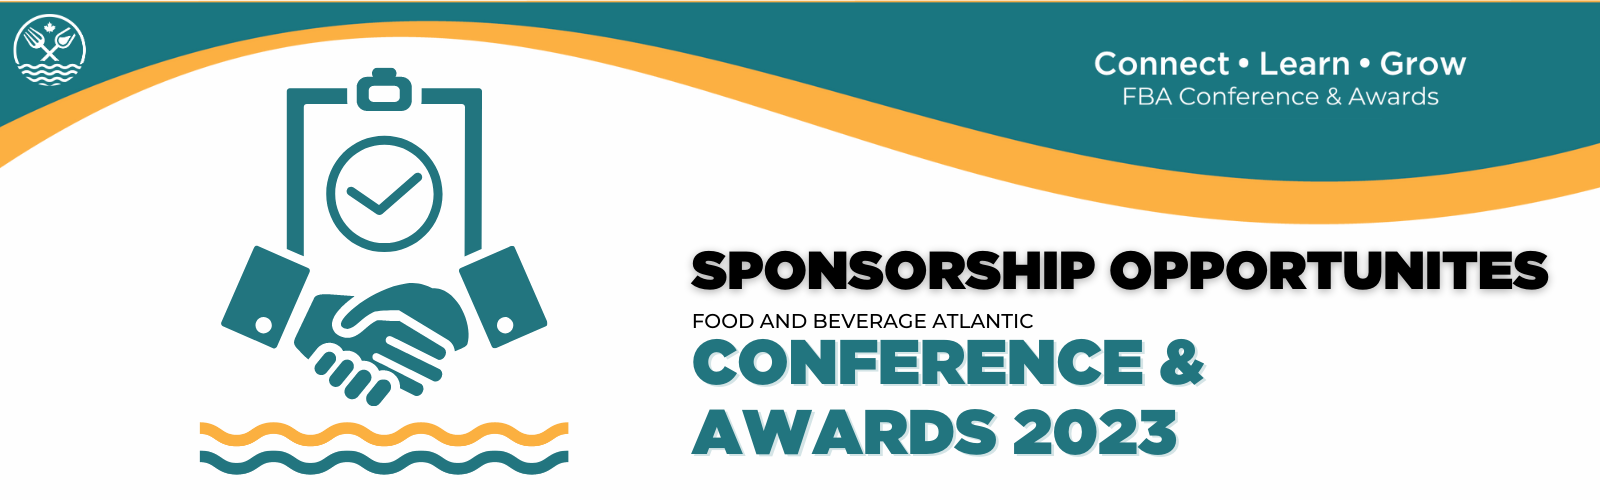 FBA Conference & Awards 2023 banner - Sponsor the event 24th 25th October Halifax